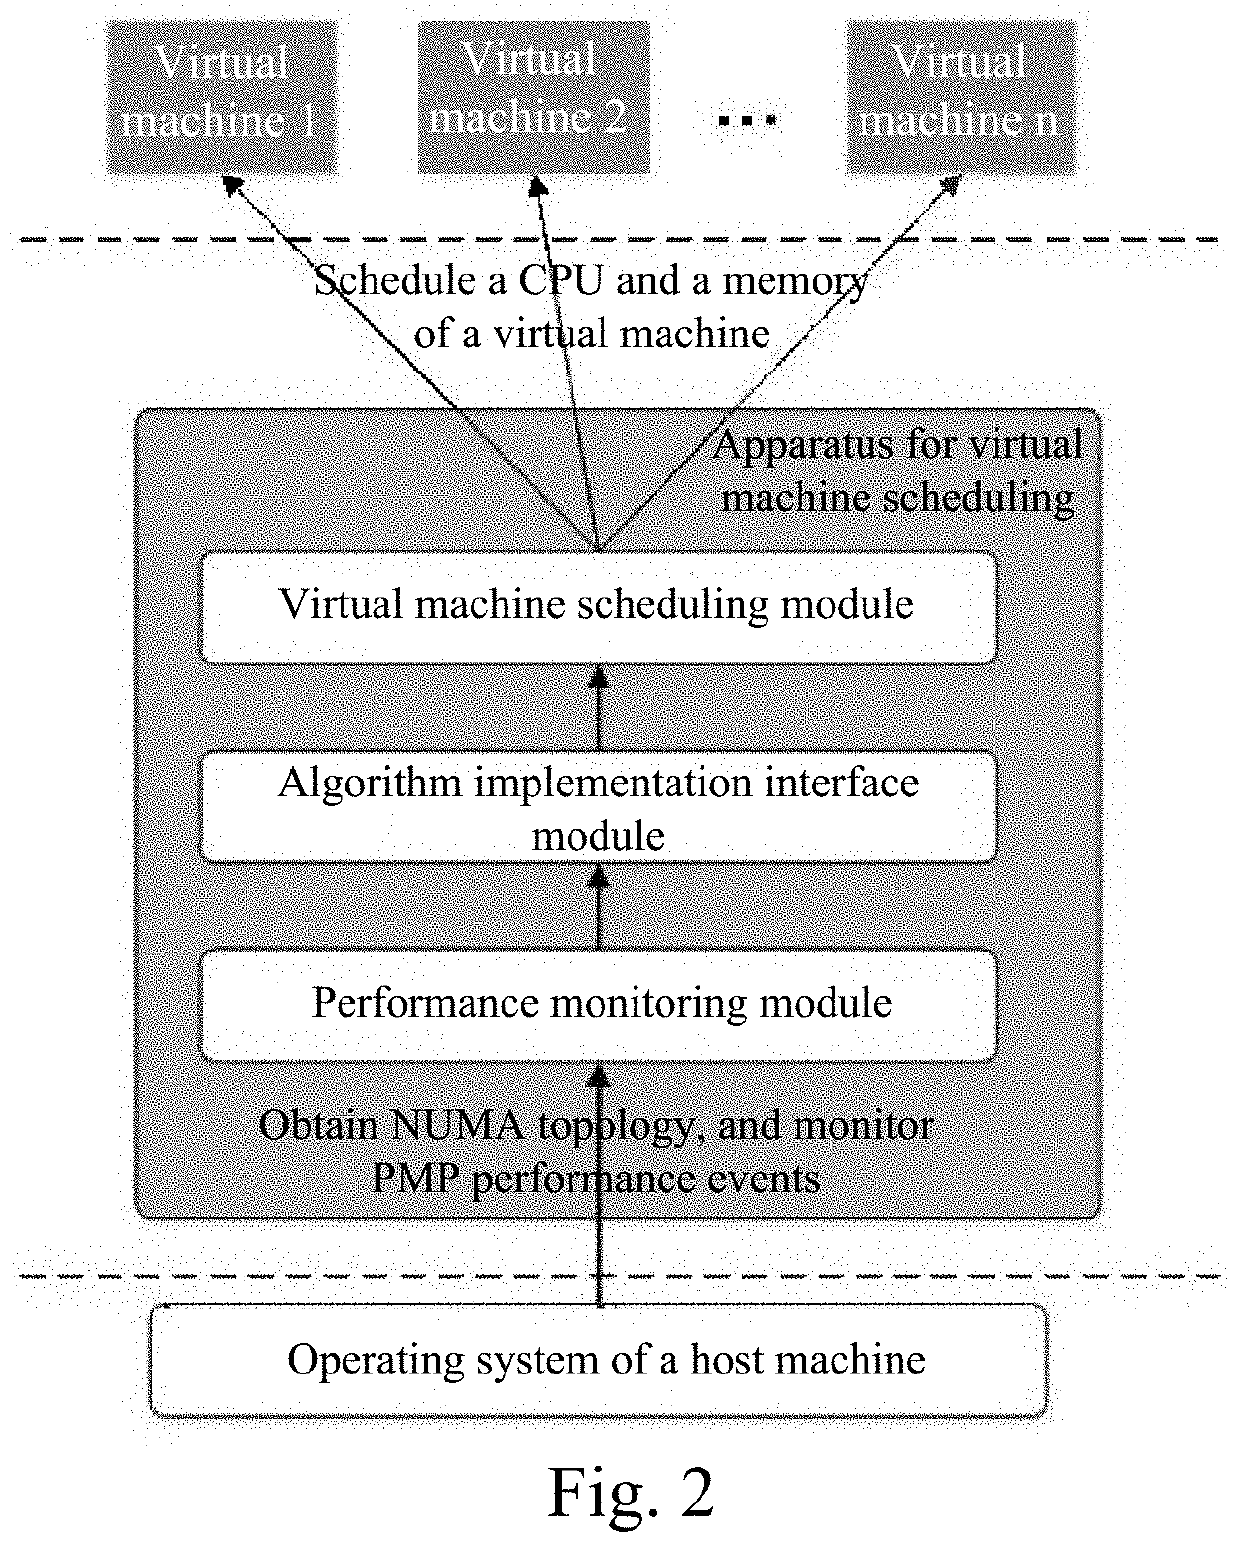 Apparatus and method for virtual machine scheduling in non-uniform memory access architecture